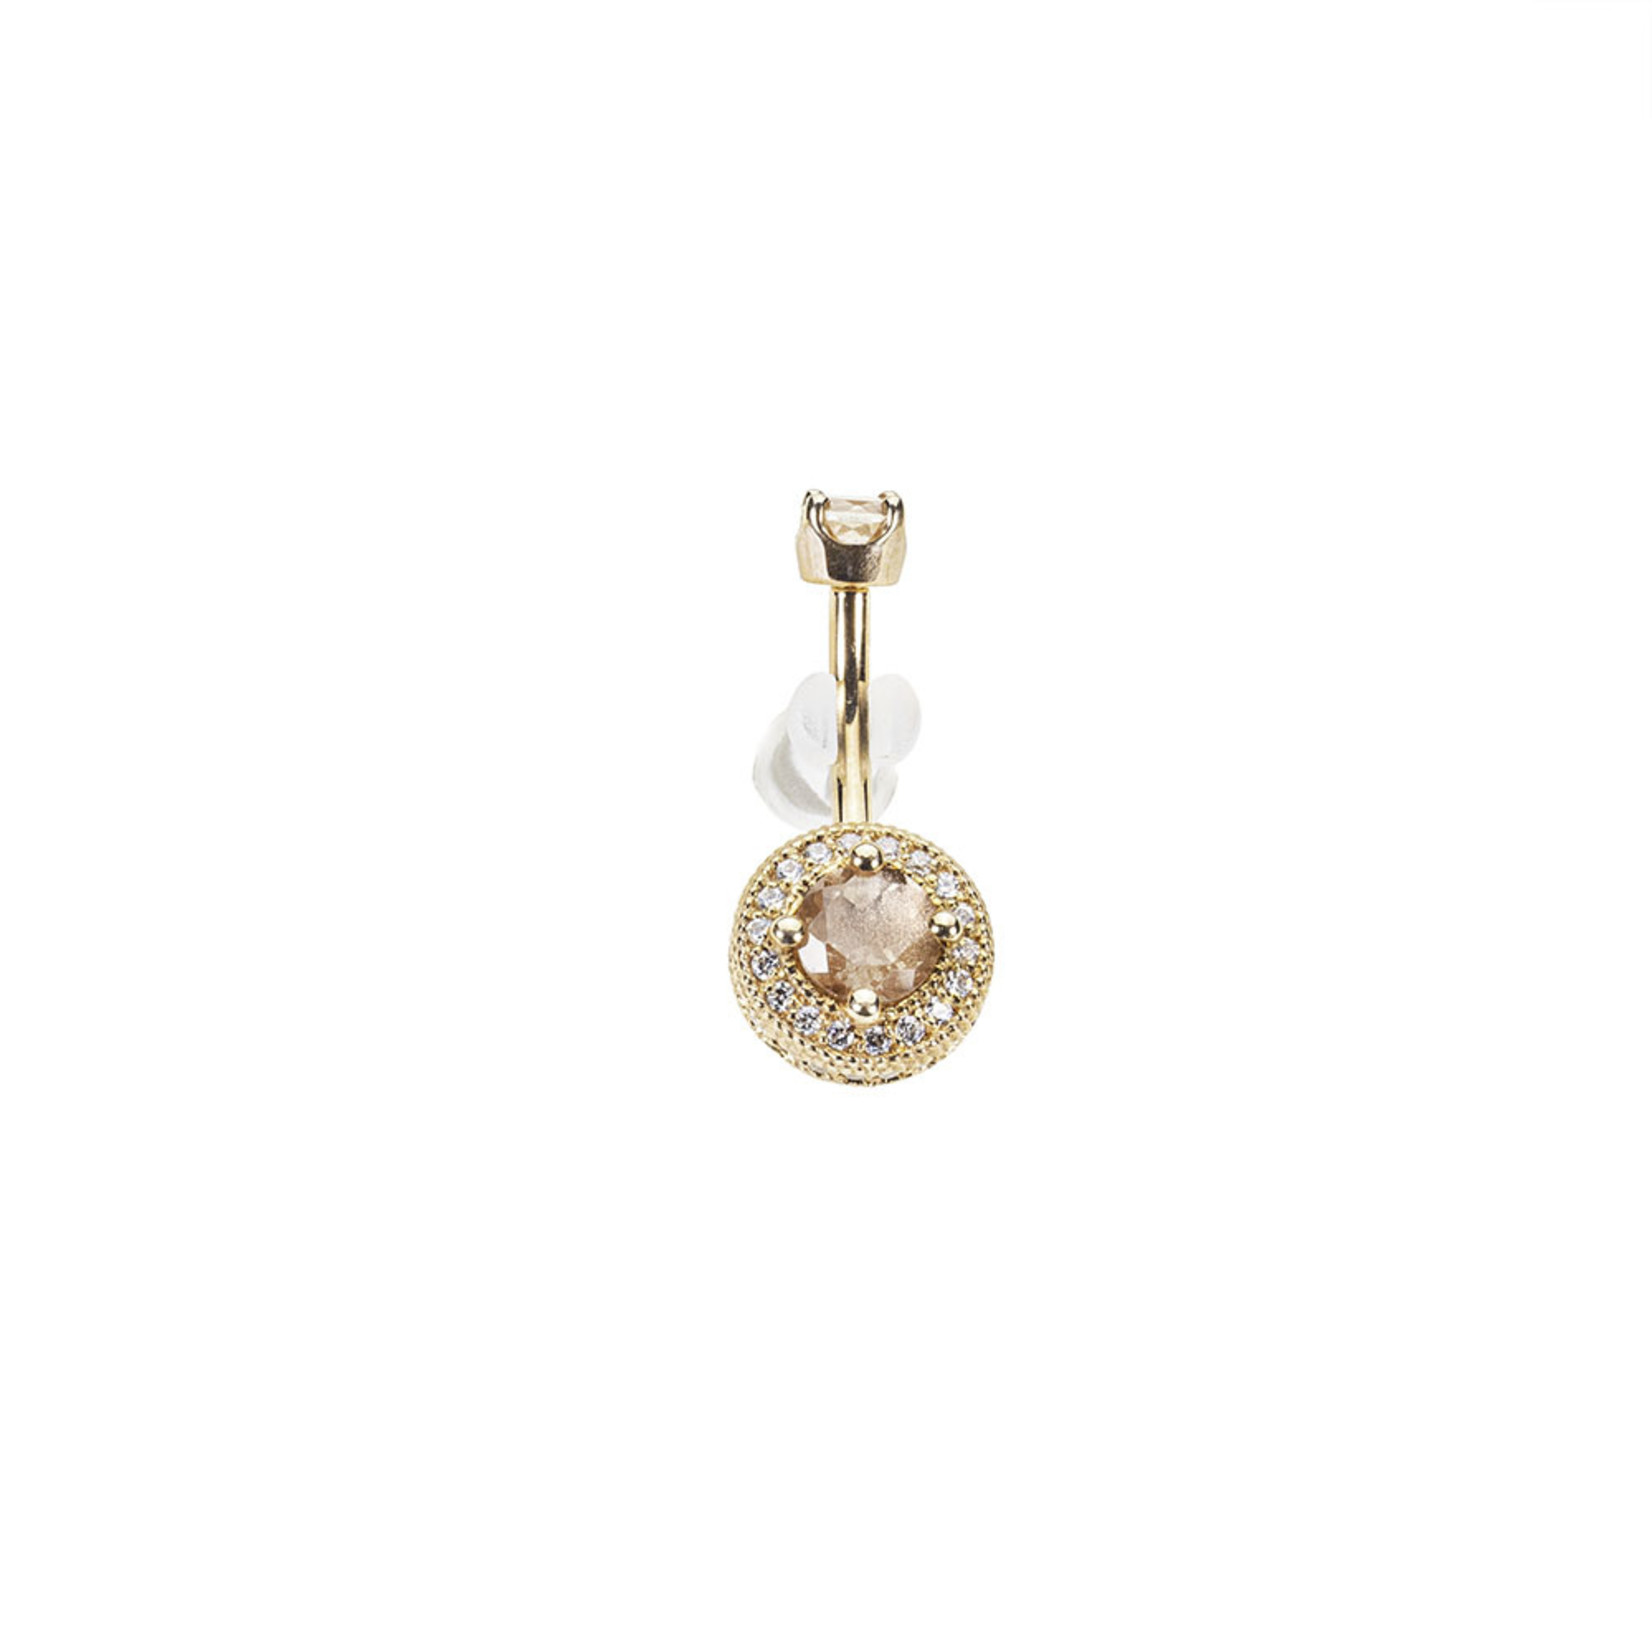 BVLA BVLA 14g 3/8 rose gold "Halo" navel curve with 4.0 prong set Oregon Sunstone top and a 5.0 Oregon Sunstone  center surrounded by 1.25 & 1.0 CZ